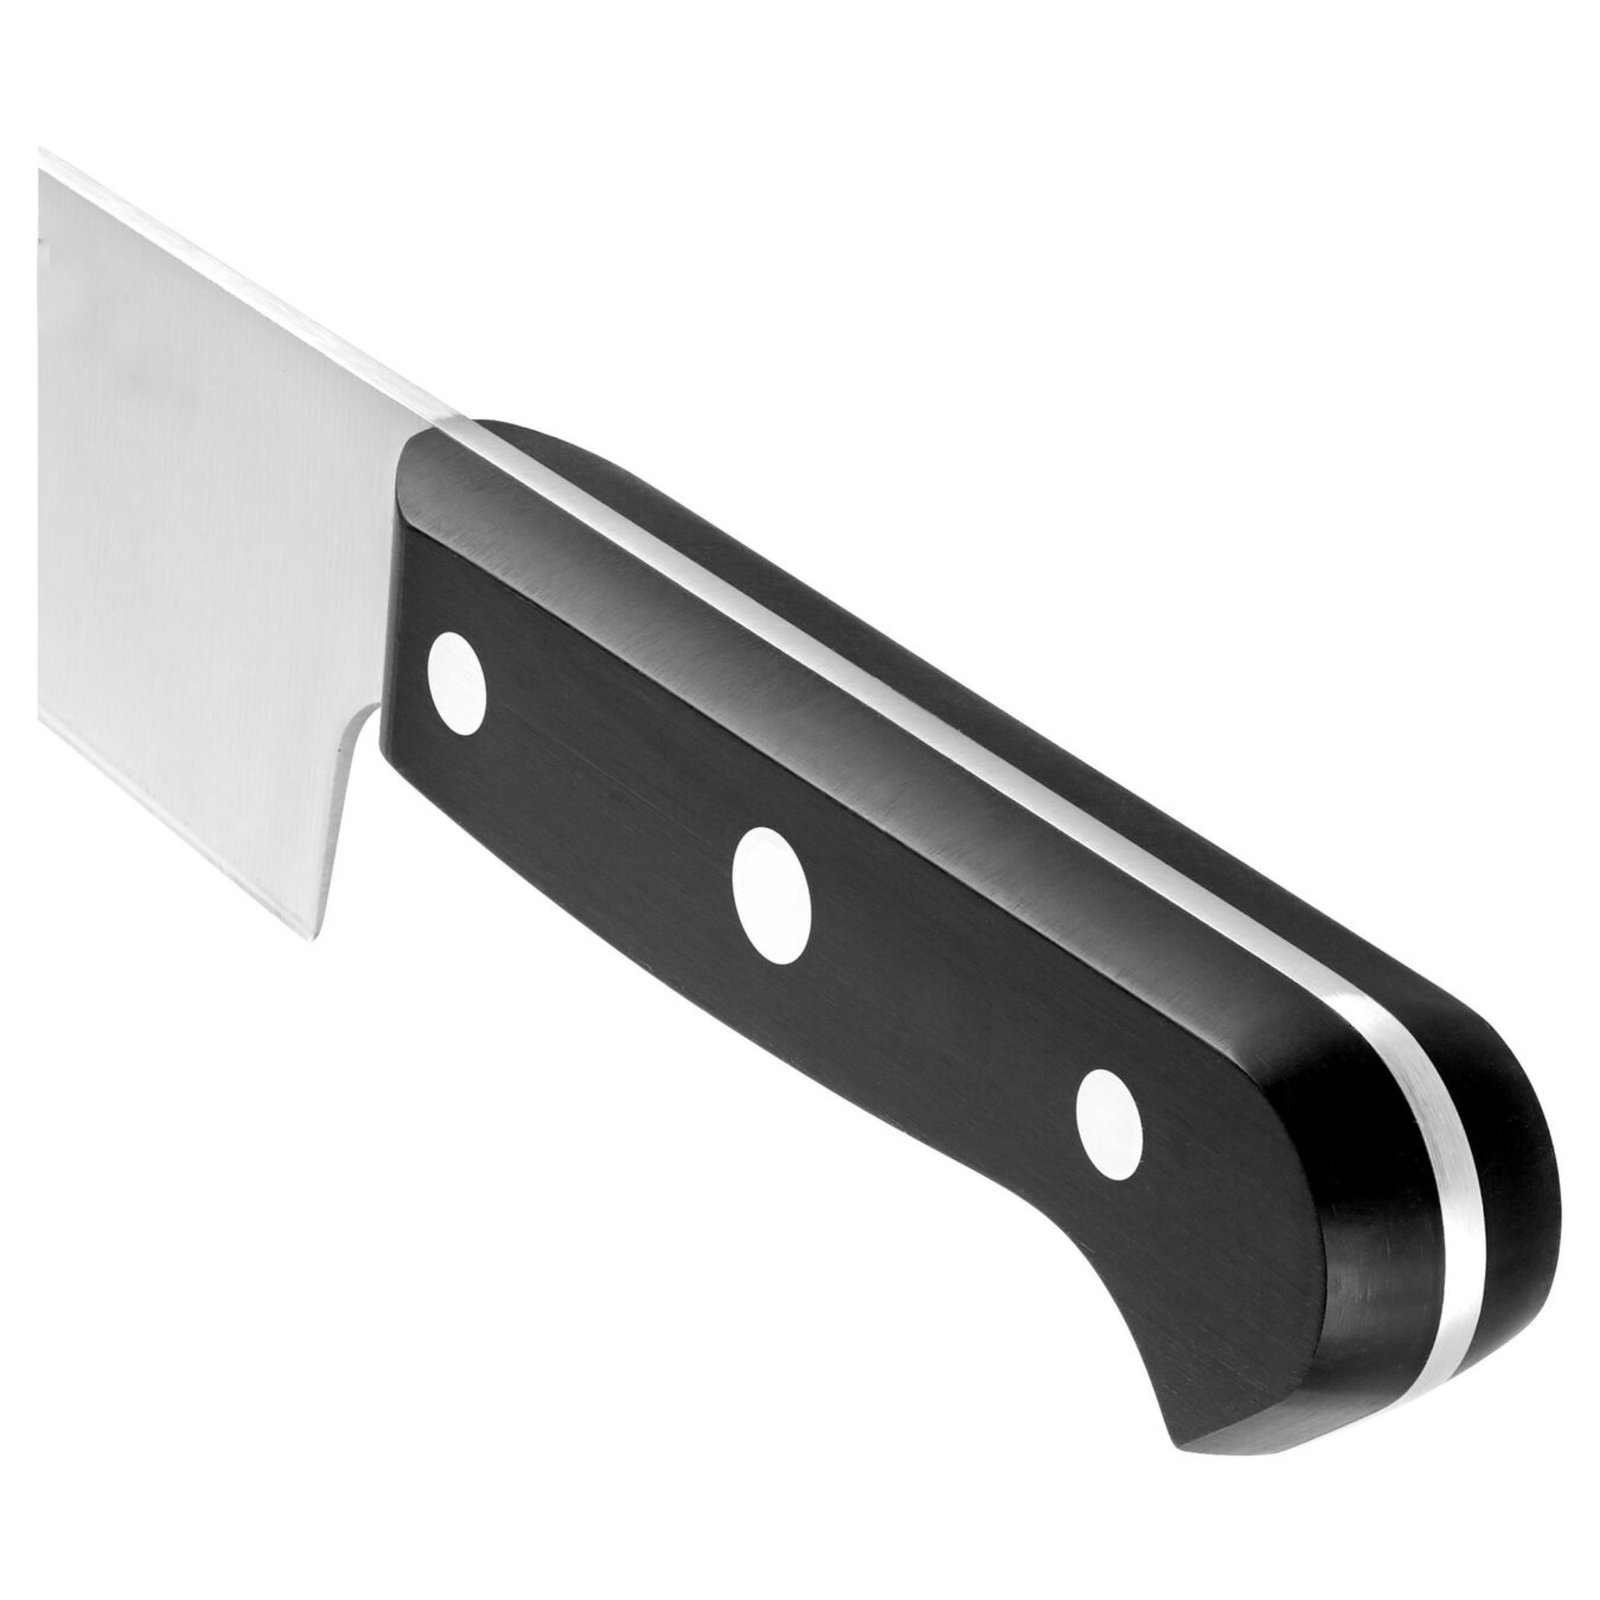 Chef Knife Stainless Steel-8 Inch